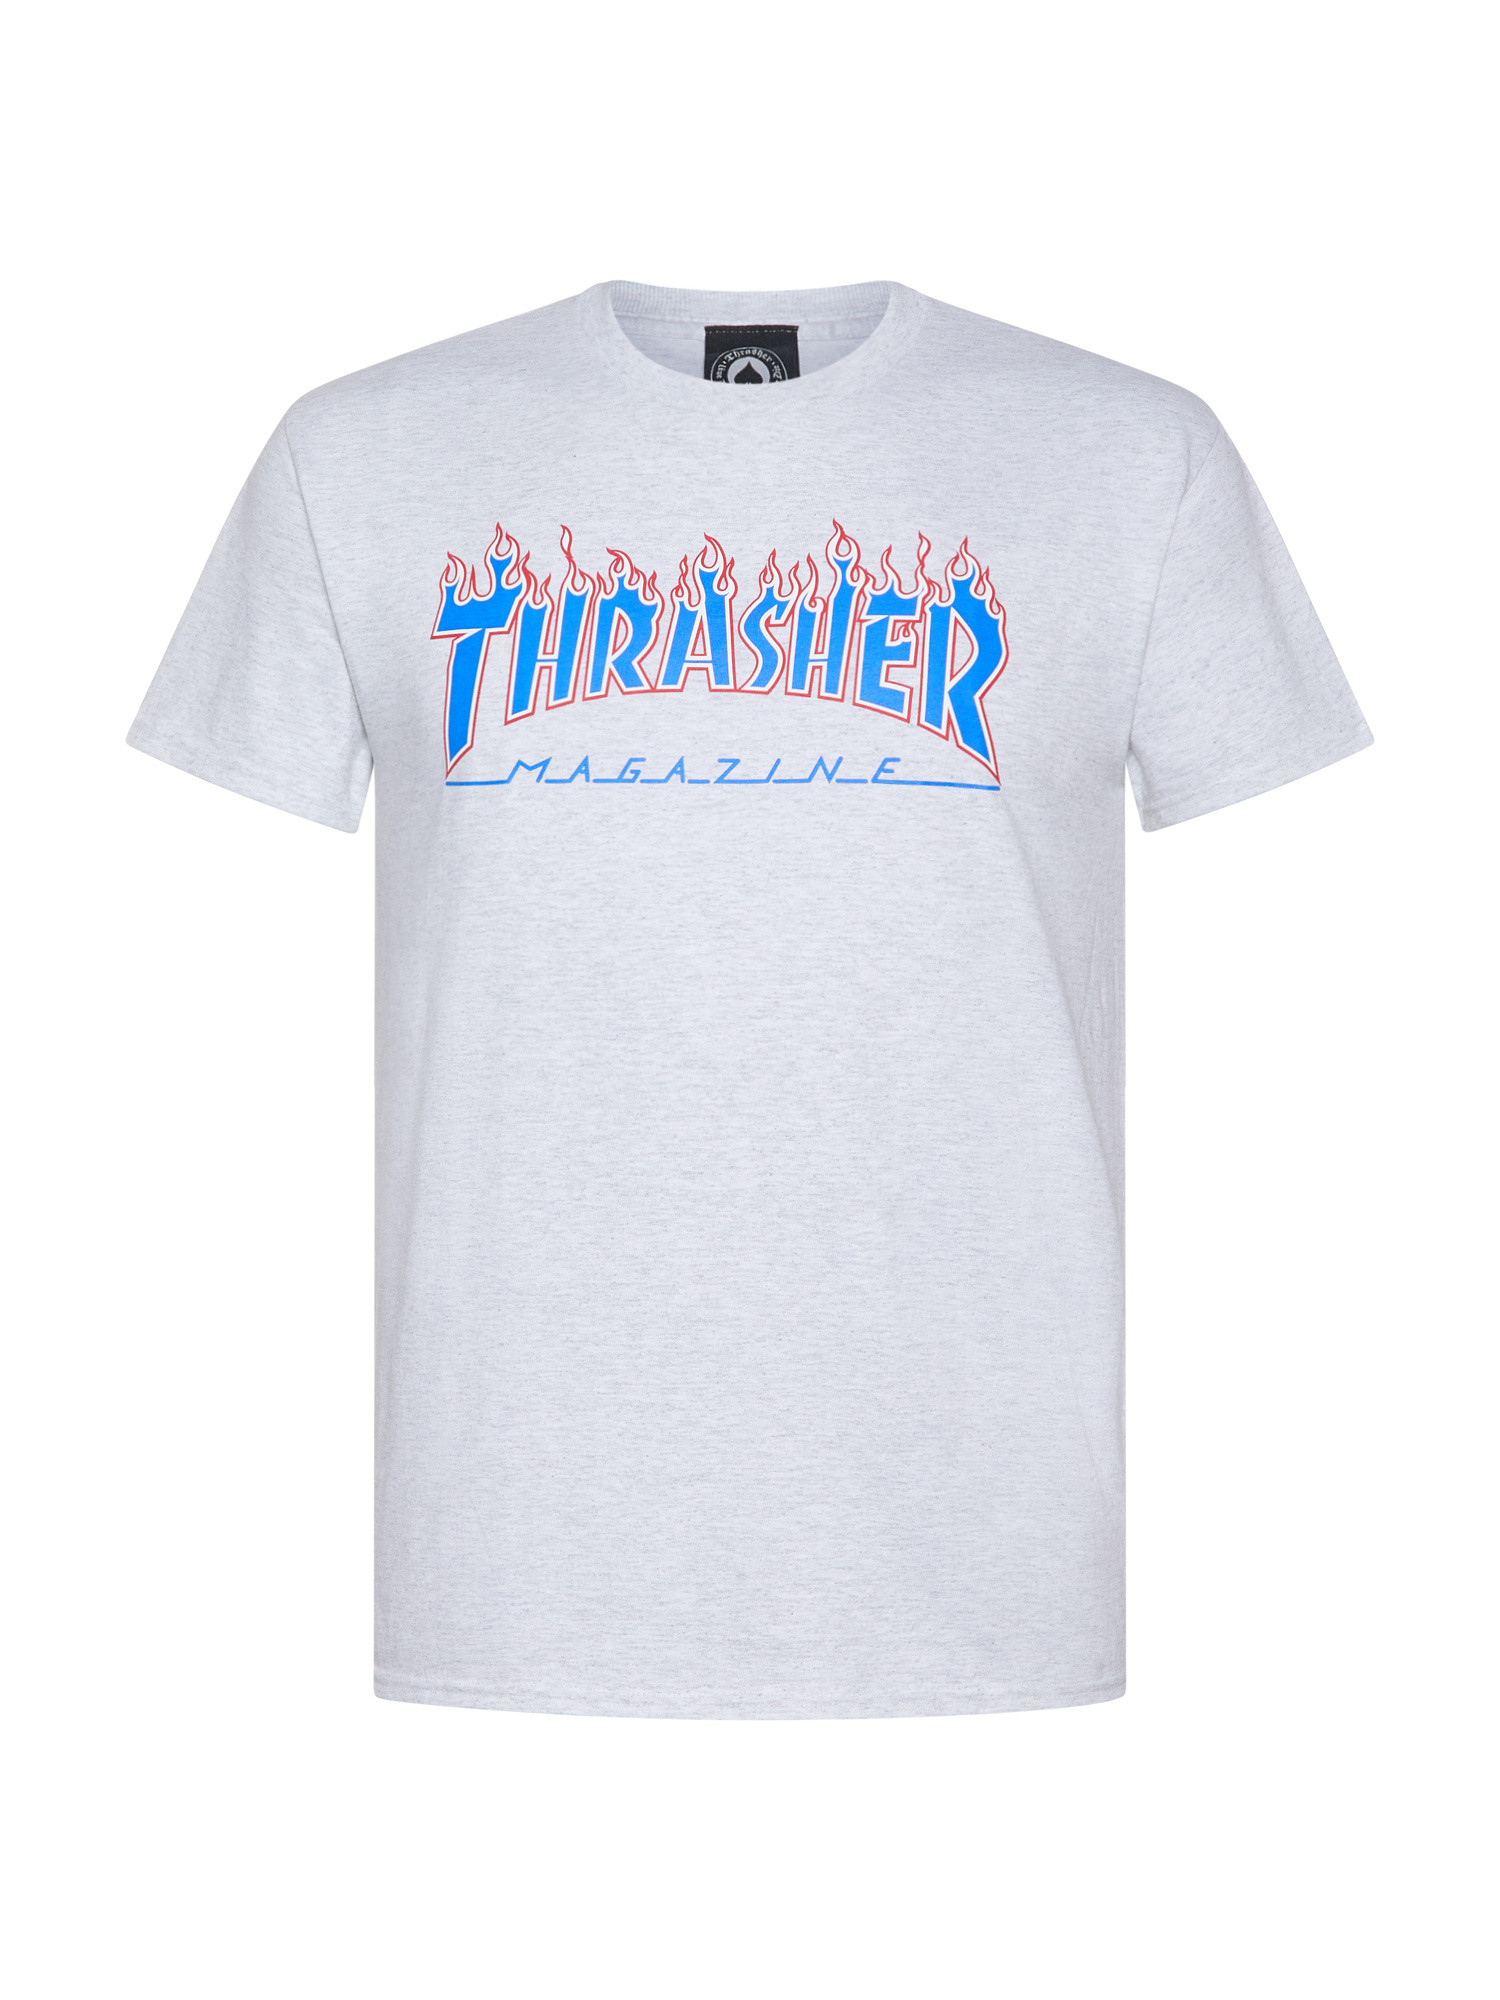 Thrasher - T-Shirt with print, Light Grey, large image number 0